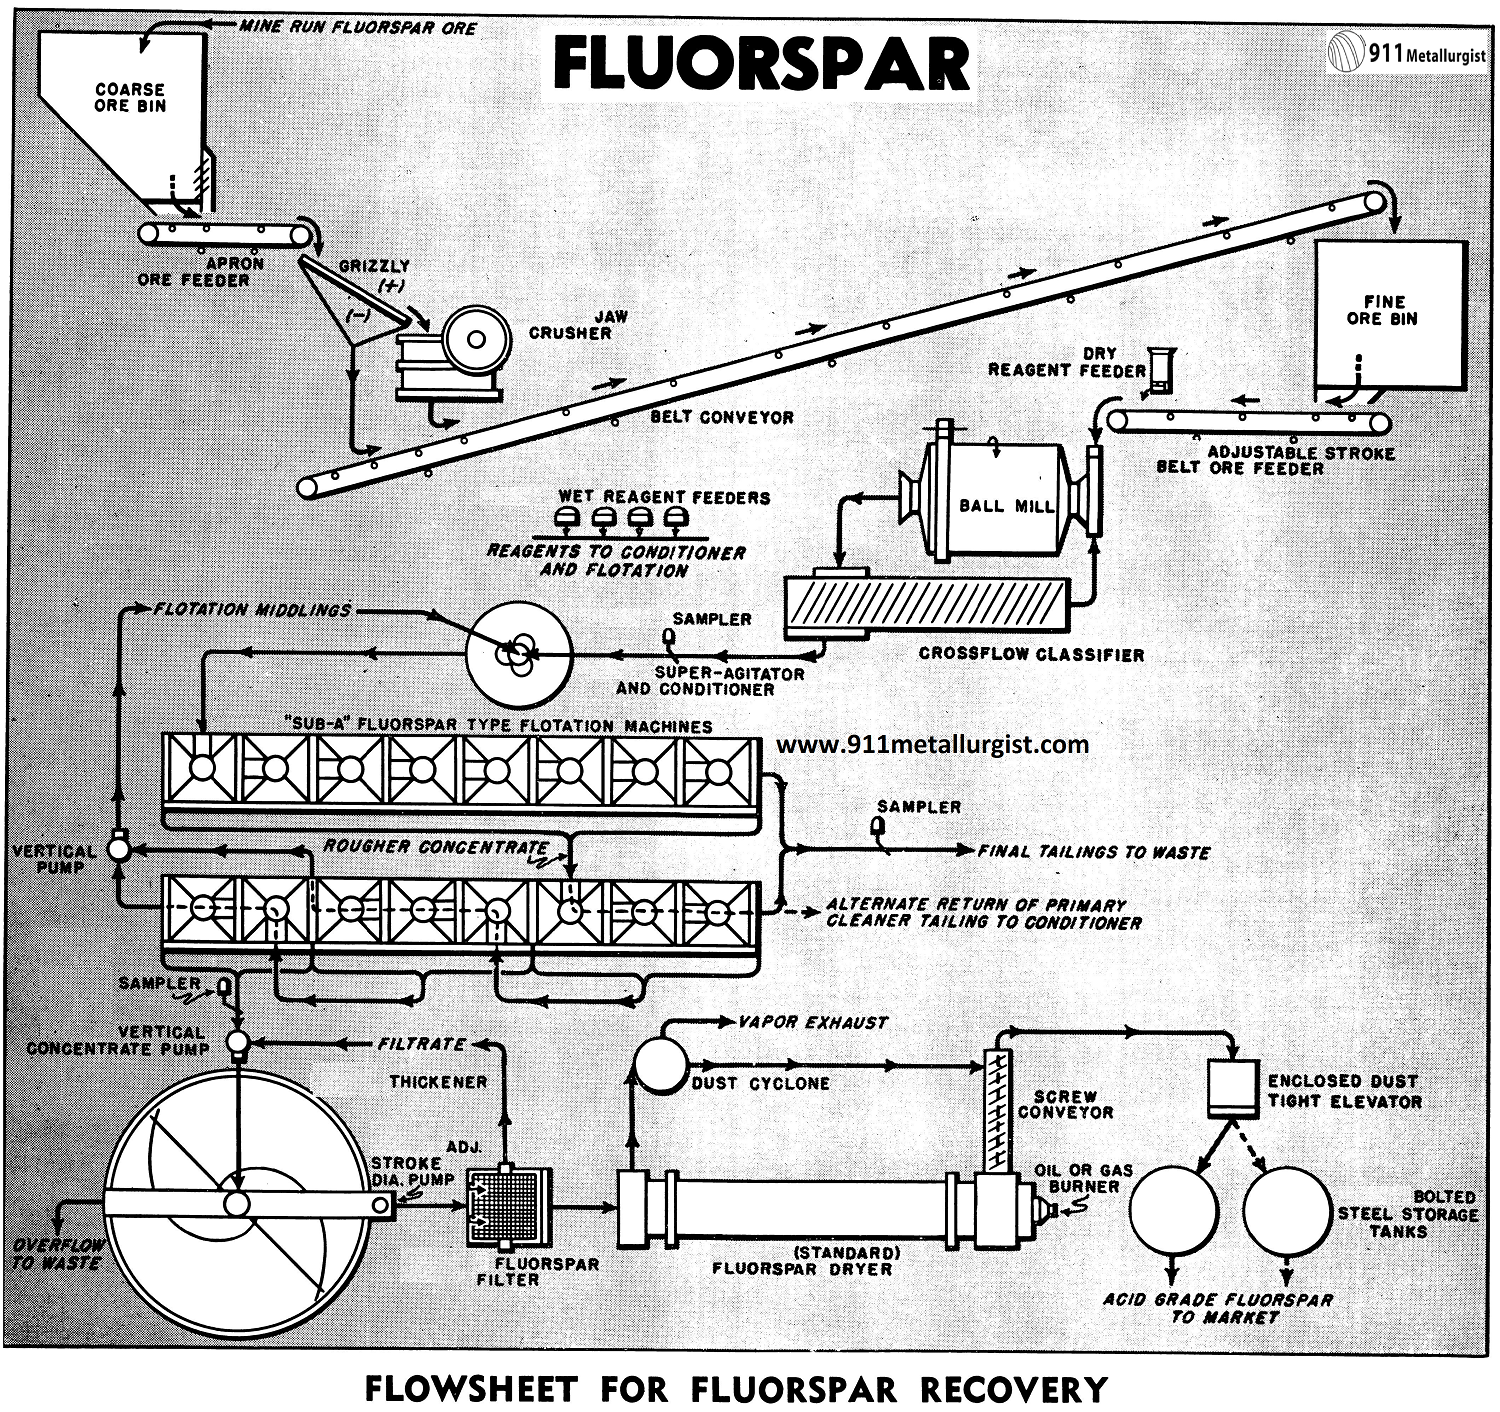 Flowsheet for Fluorspar Recovery